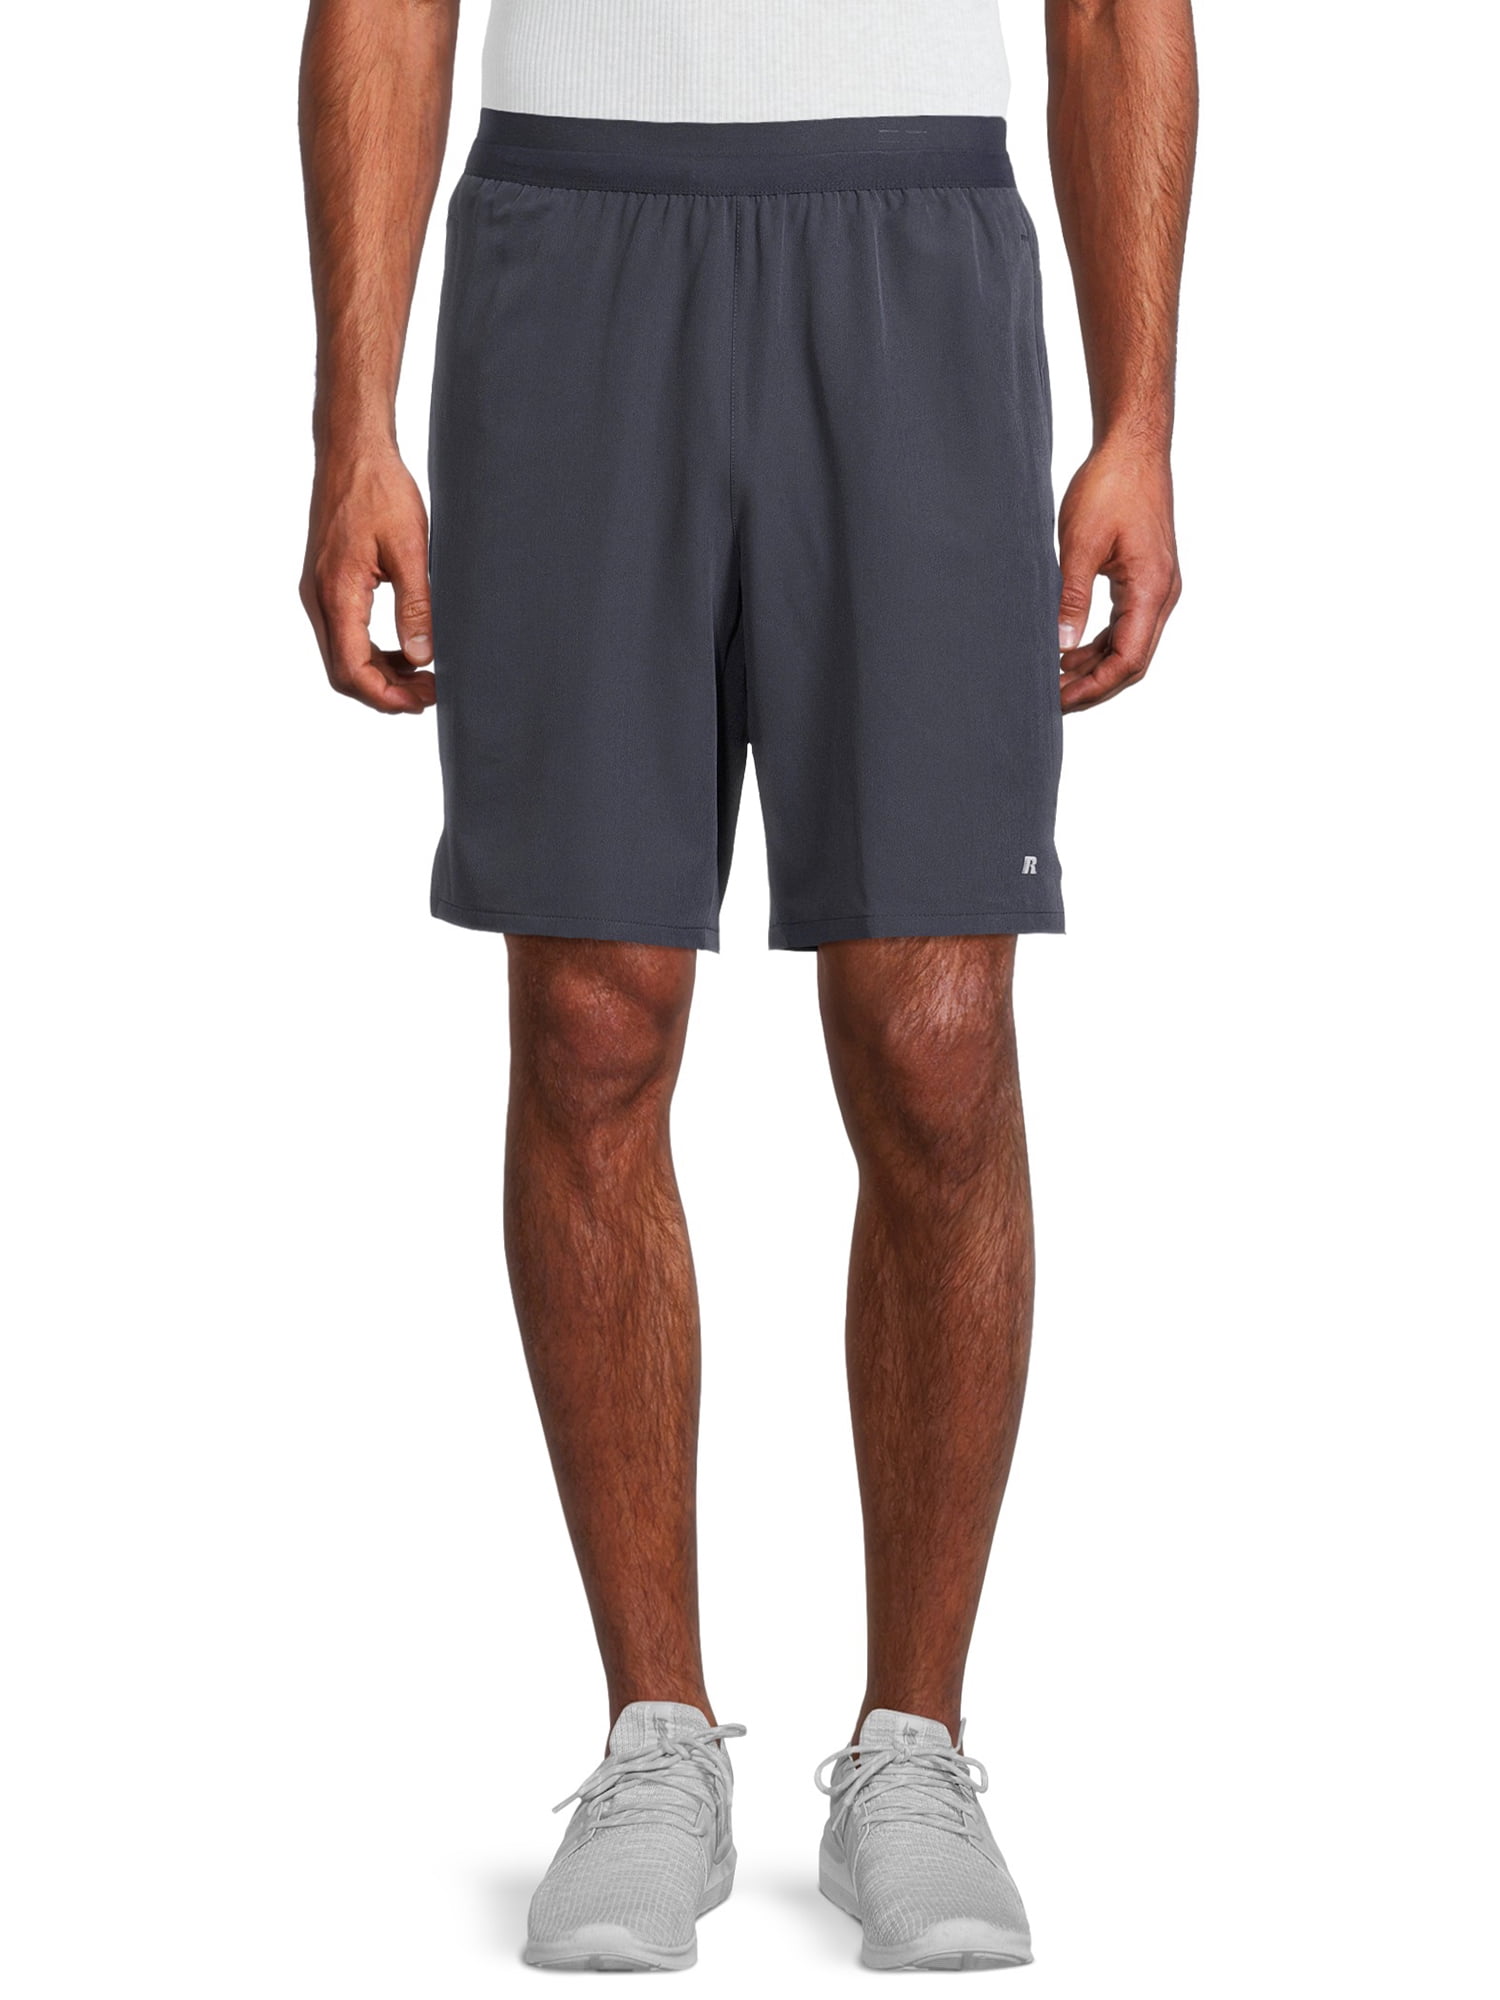 Russell Men's and Big Men's Active 2-in-1 Woven 9